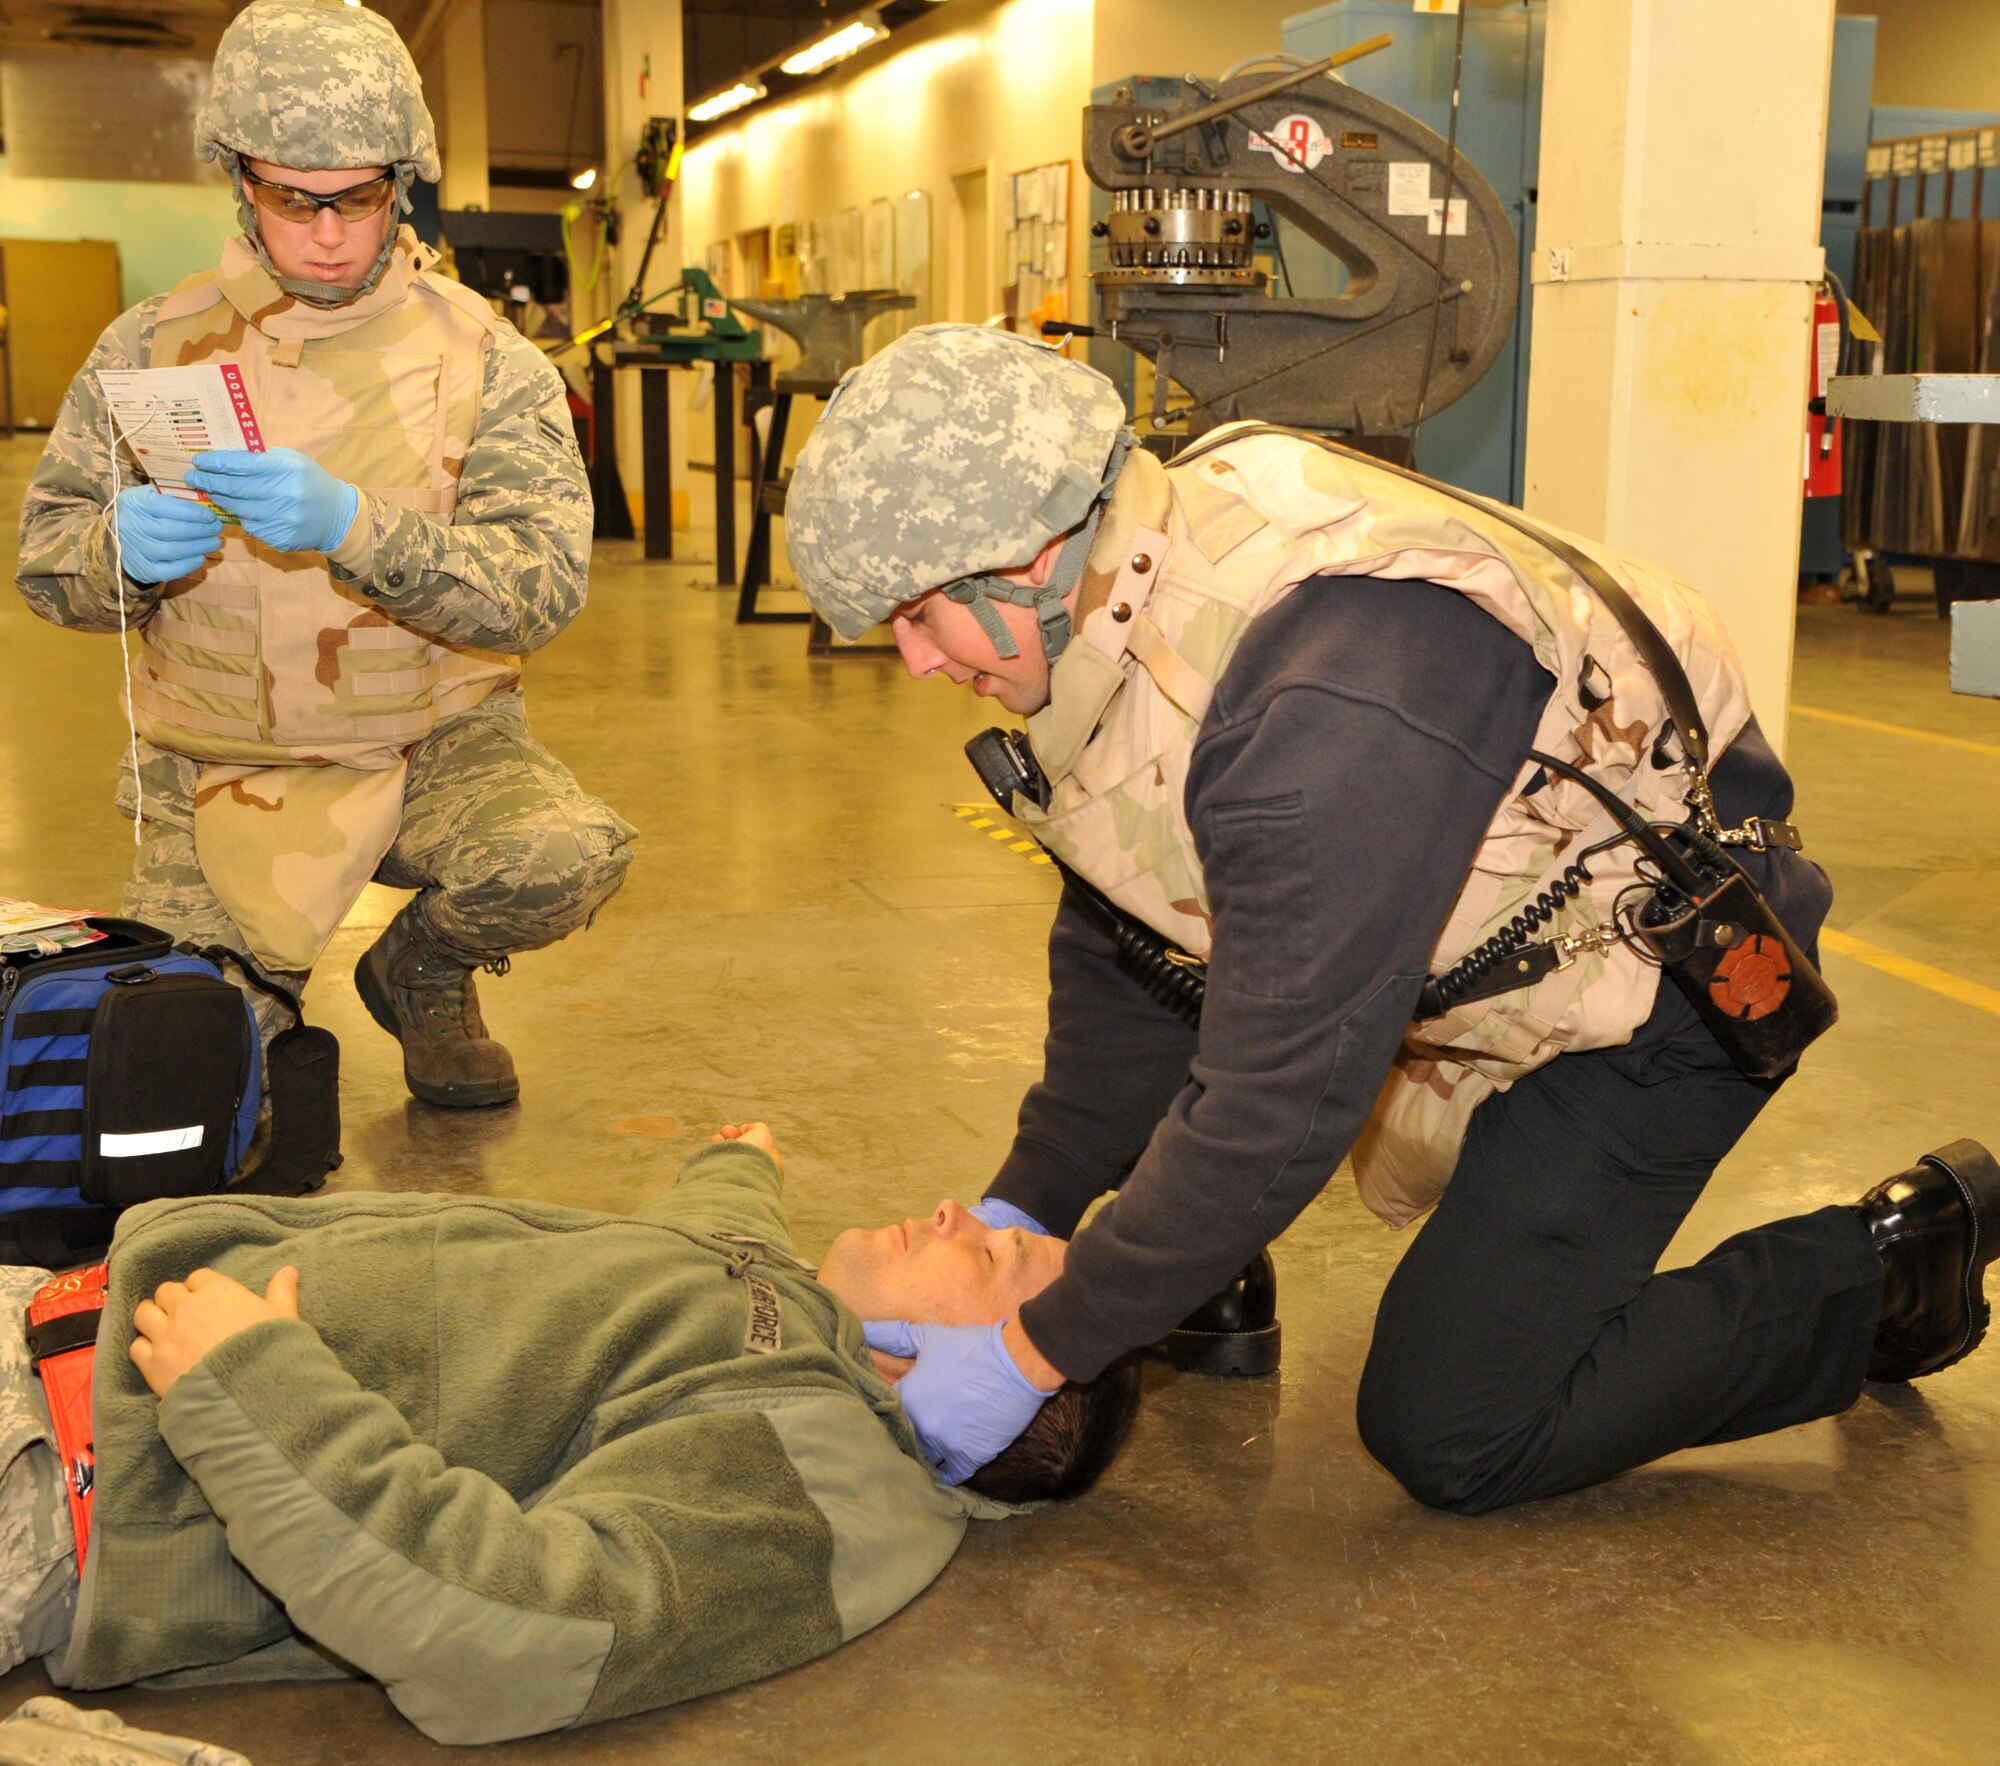 First responders assess and treat a wounded Airman during an active shooter exercise Jan. 13, 2017 at Beale Air Force Base, California. The first responders began treating the victims once the building was secured by the 9th Security Forces Squadron. (U.S. Air Force photo/Airman Tristan D. Viglianco)